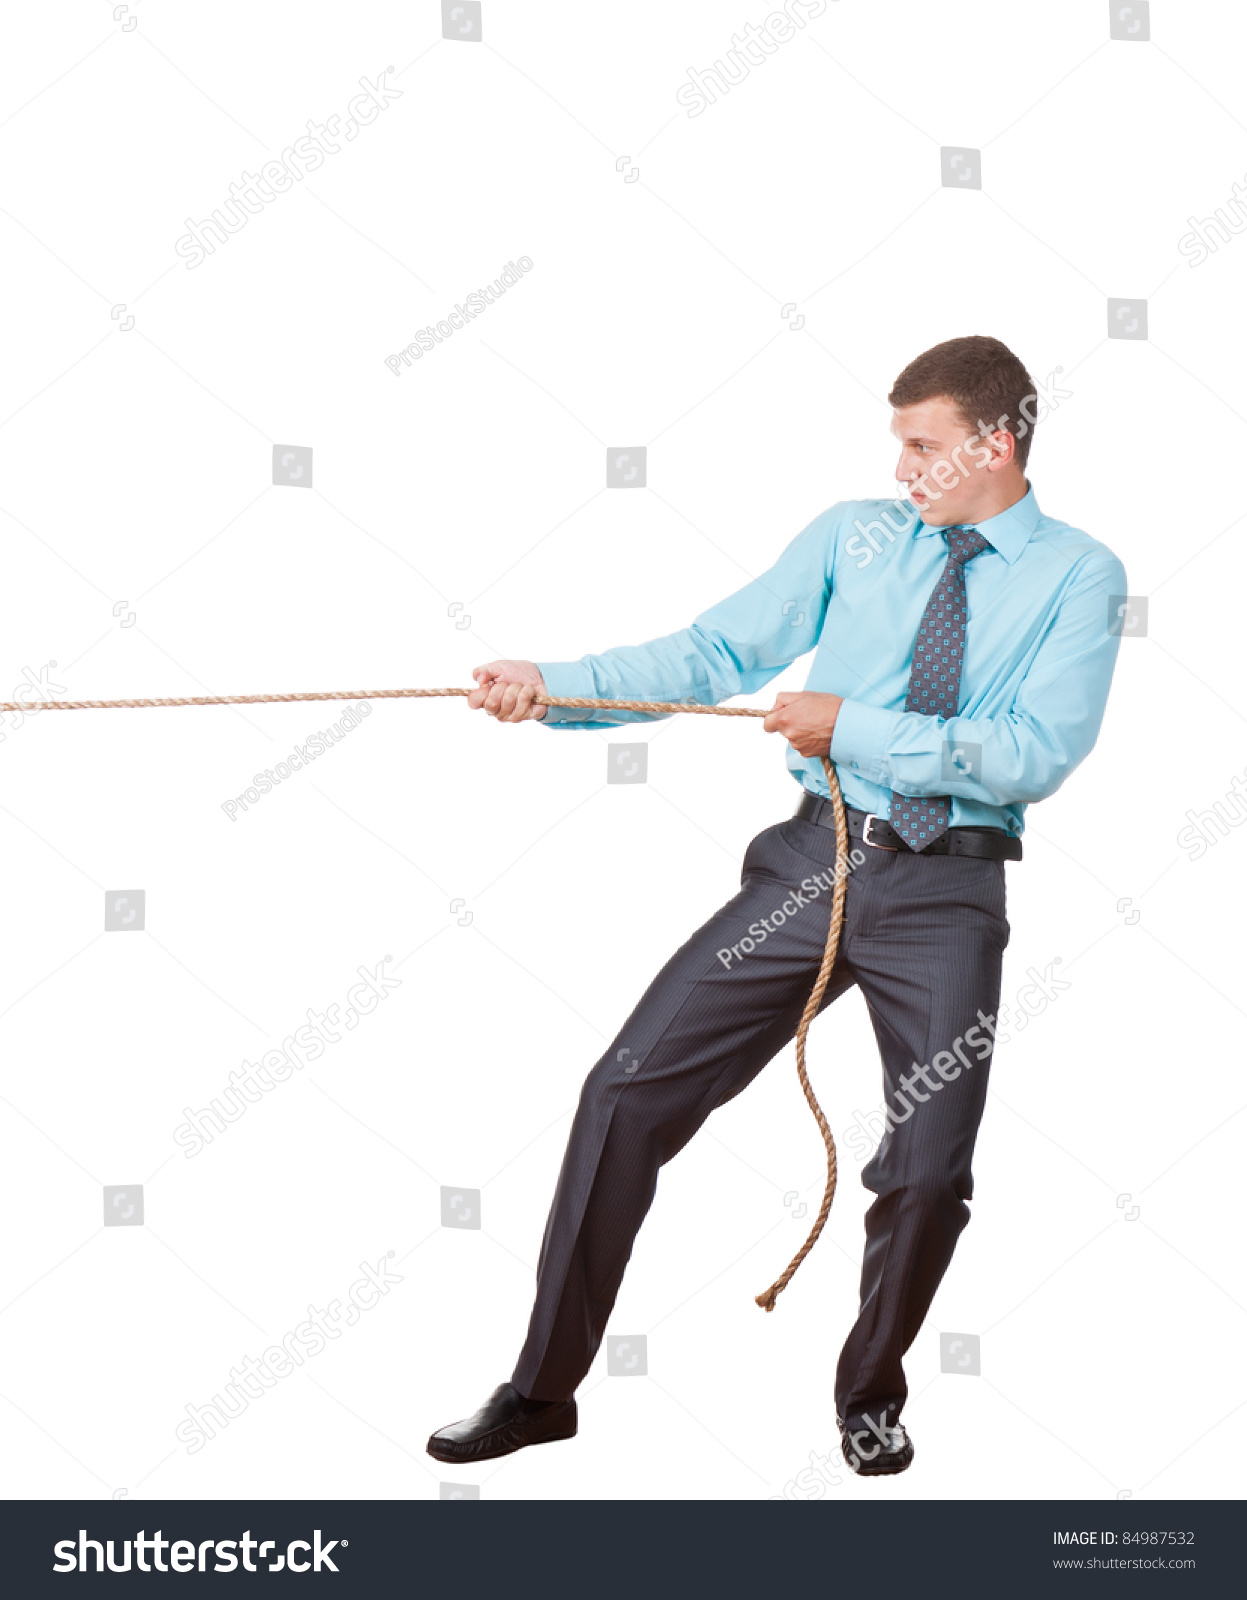 clipart man pulling rope - photo #12